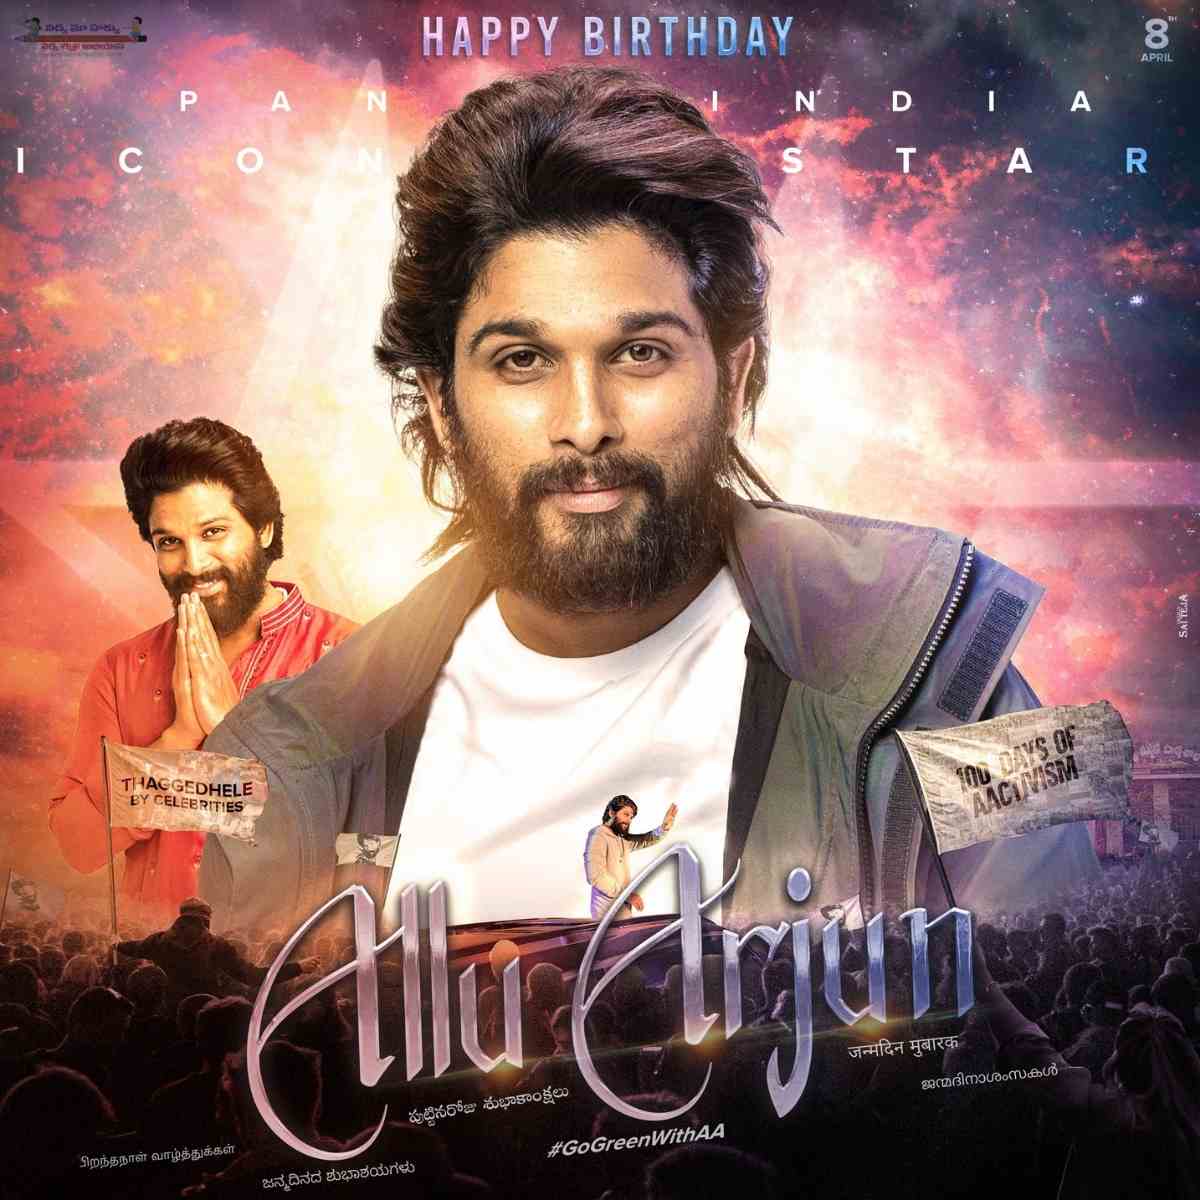 Happy Birthday Allu Arjun: Use these Wishes, Quotes, Images, And Videos To Greet 'Stylish Star'